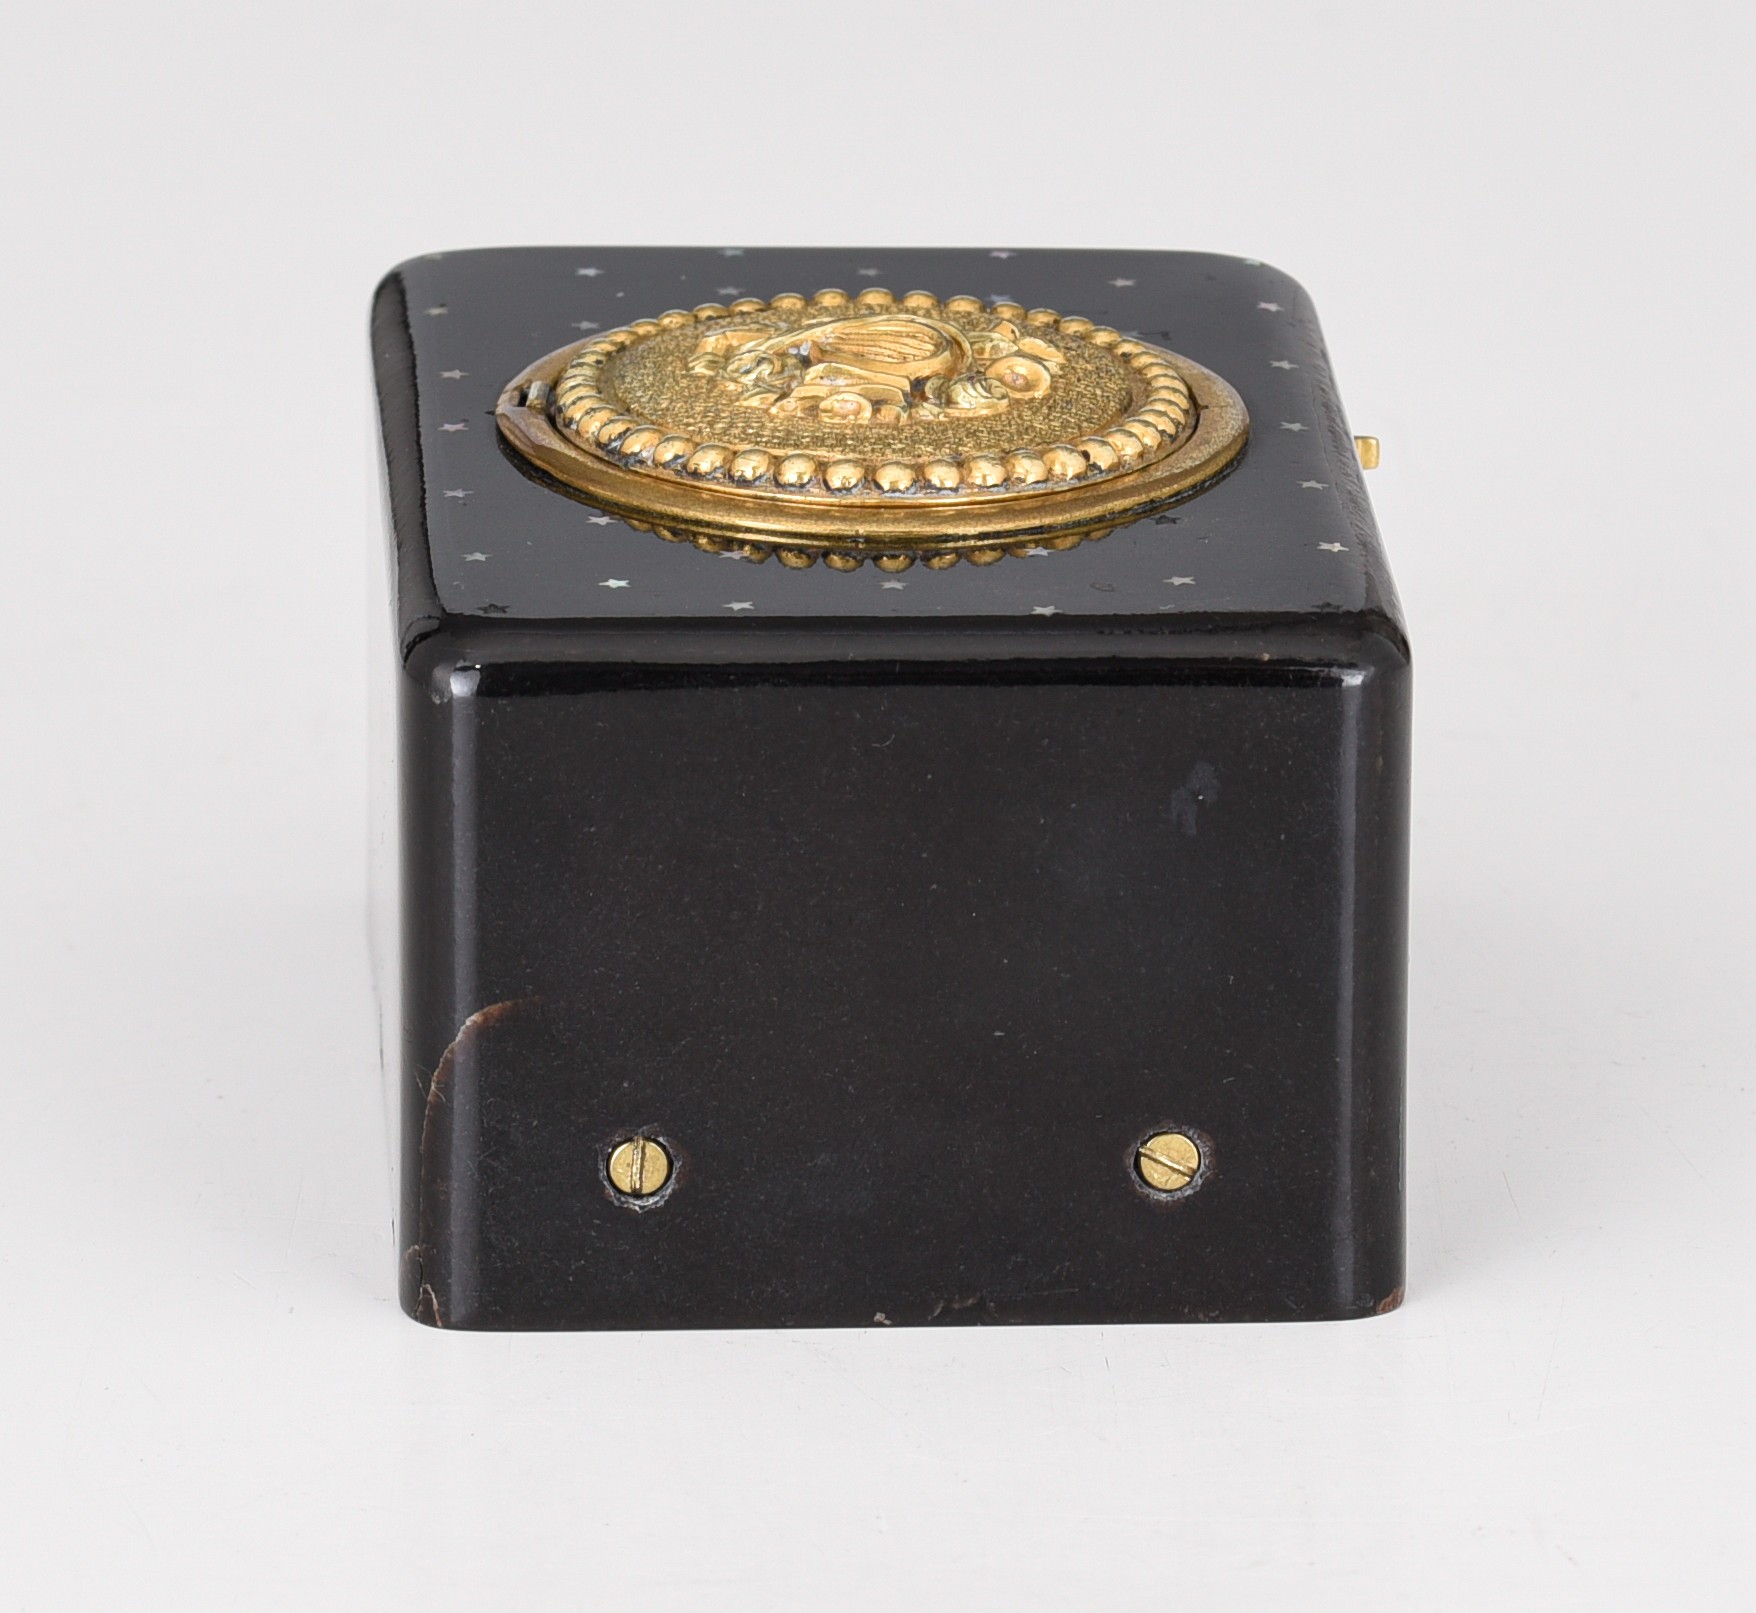 An early singing bird box with black lacquer and mother-of-pearl star decoration, H 5,5 - W 11 cm - Image 7 of 13